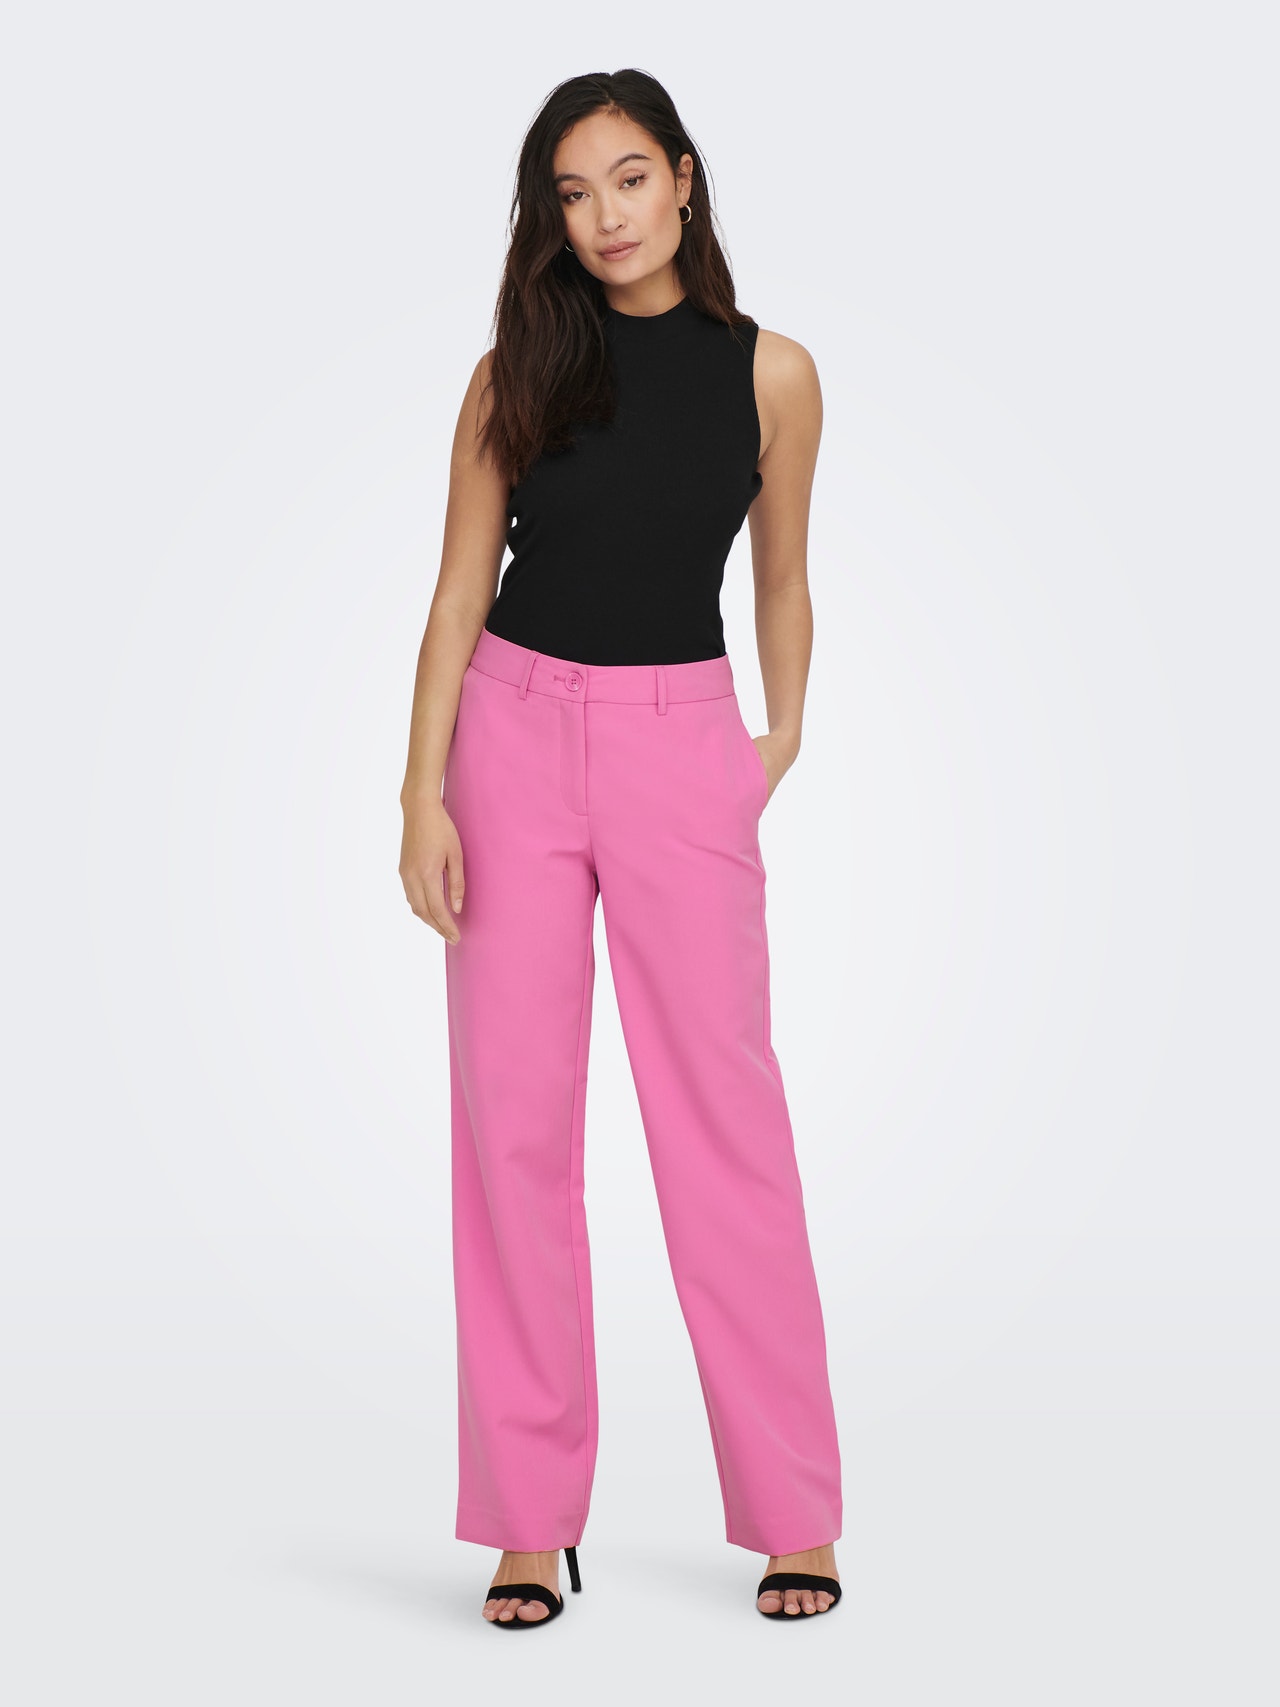 https://images.only.com/15267759/4187611/005/only-coupedroitepantalon-rose.jpg?v=caa8a0581b494d04a074a955f66f219d&format=webp&width=1280&quality=90&key=25-0-3